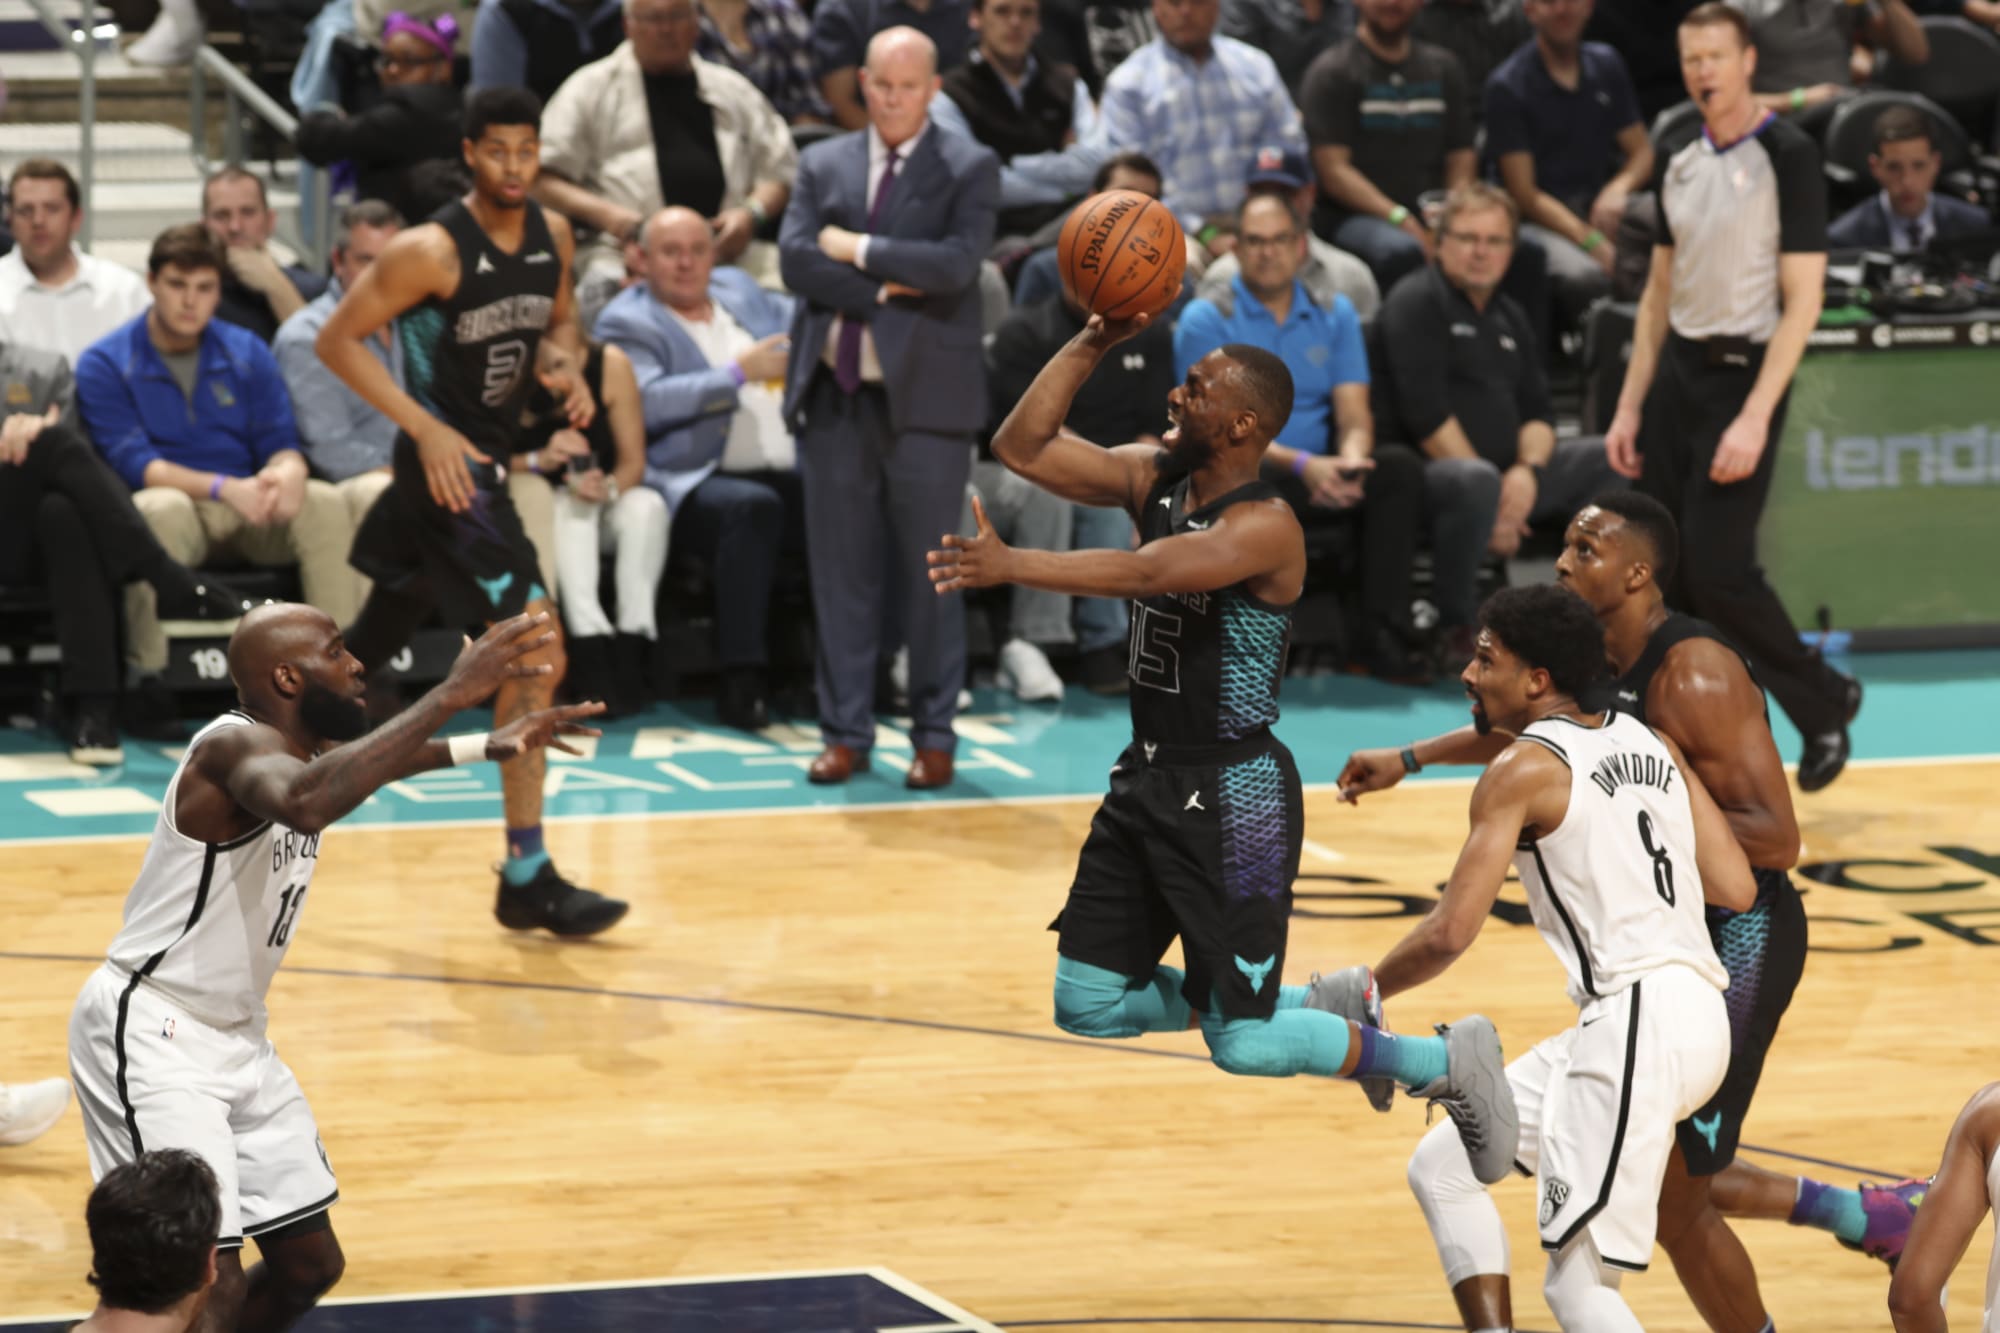 Charlotte eliminated from playoff contention, Kemba Walker's goals